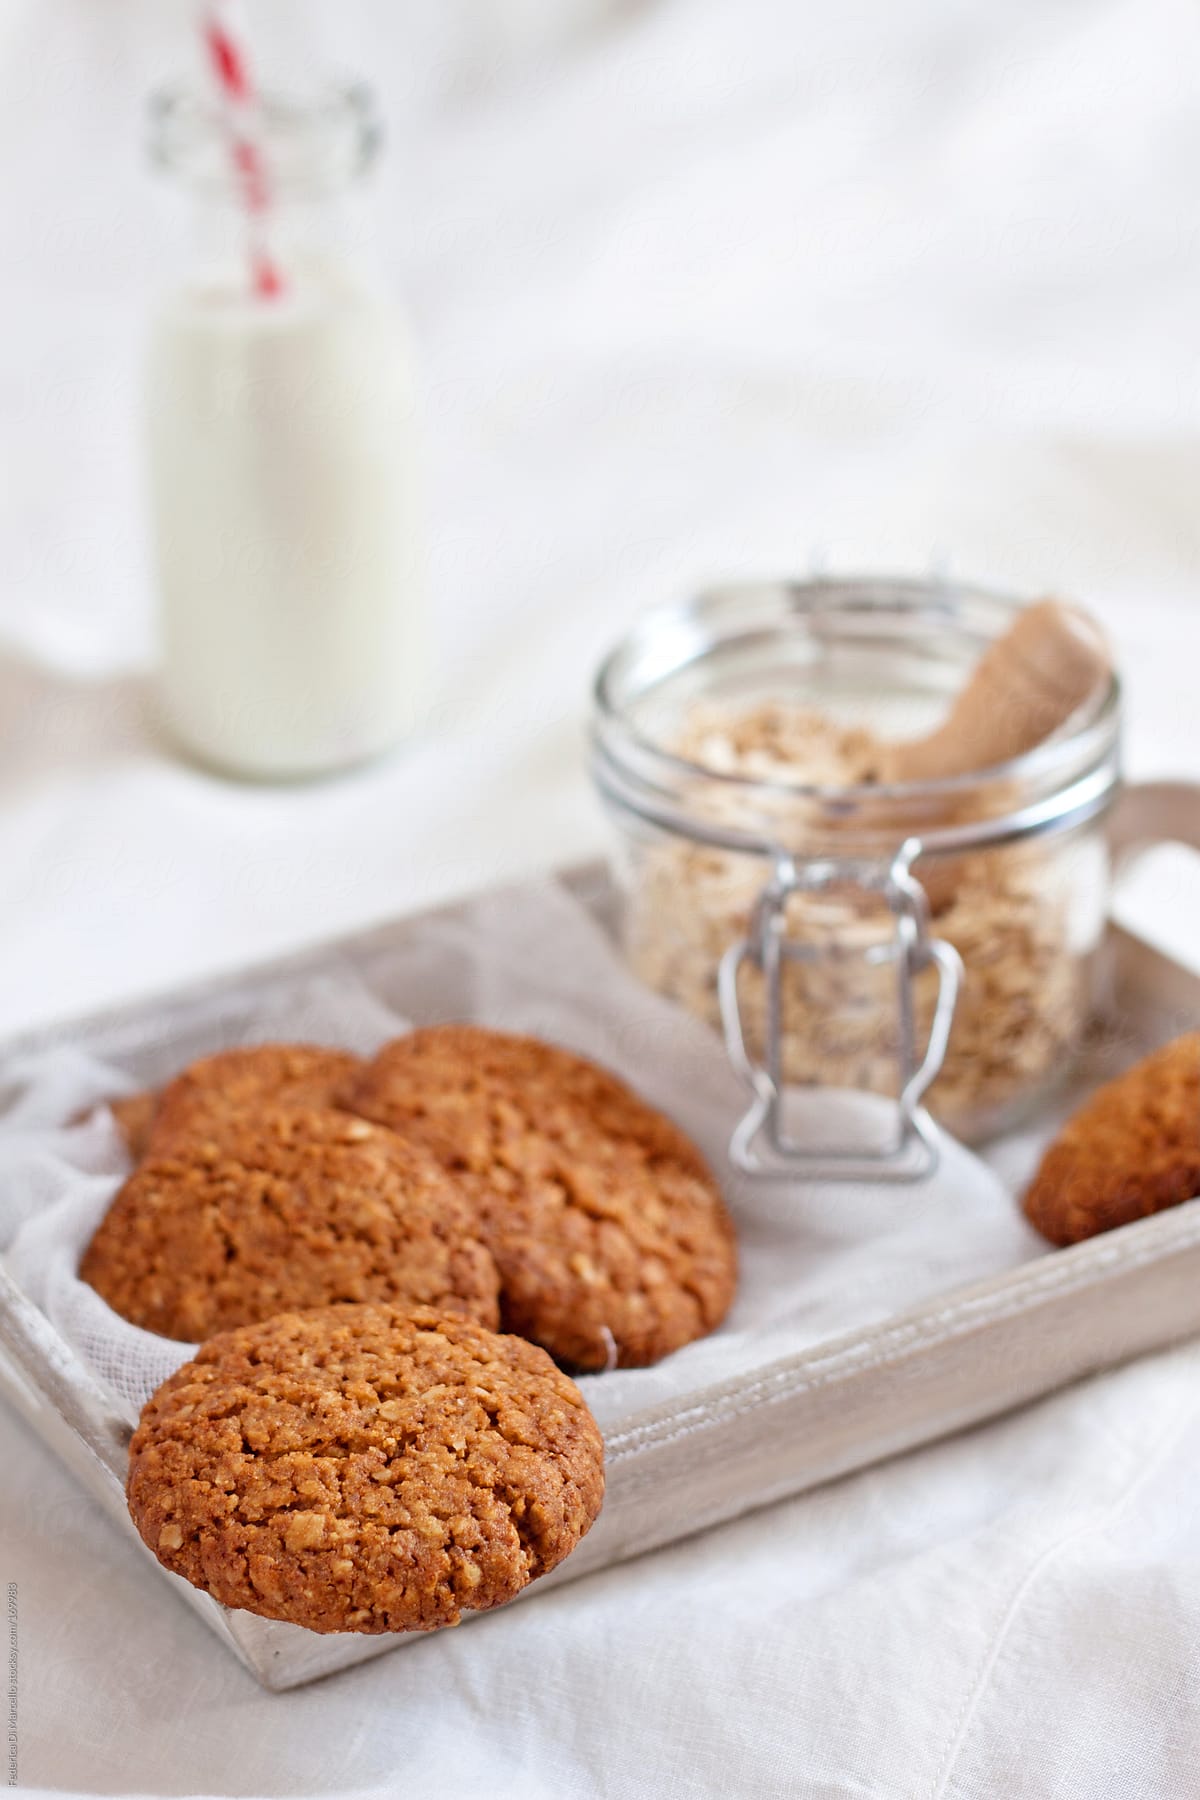 Wholemeal cookies with cereal flakes